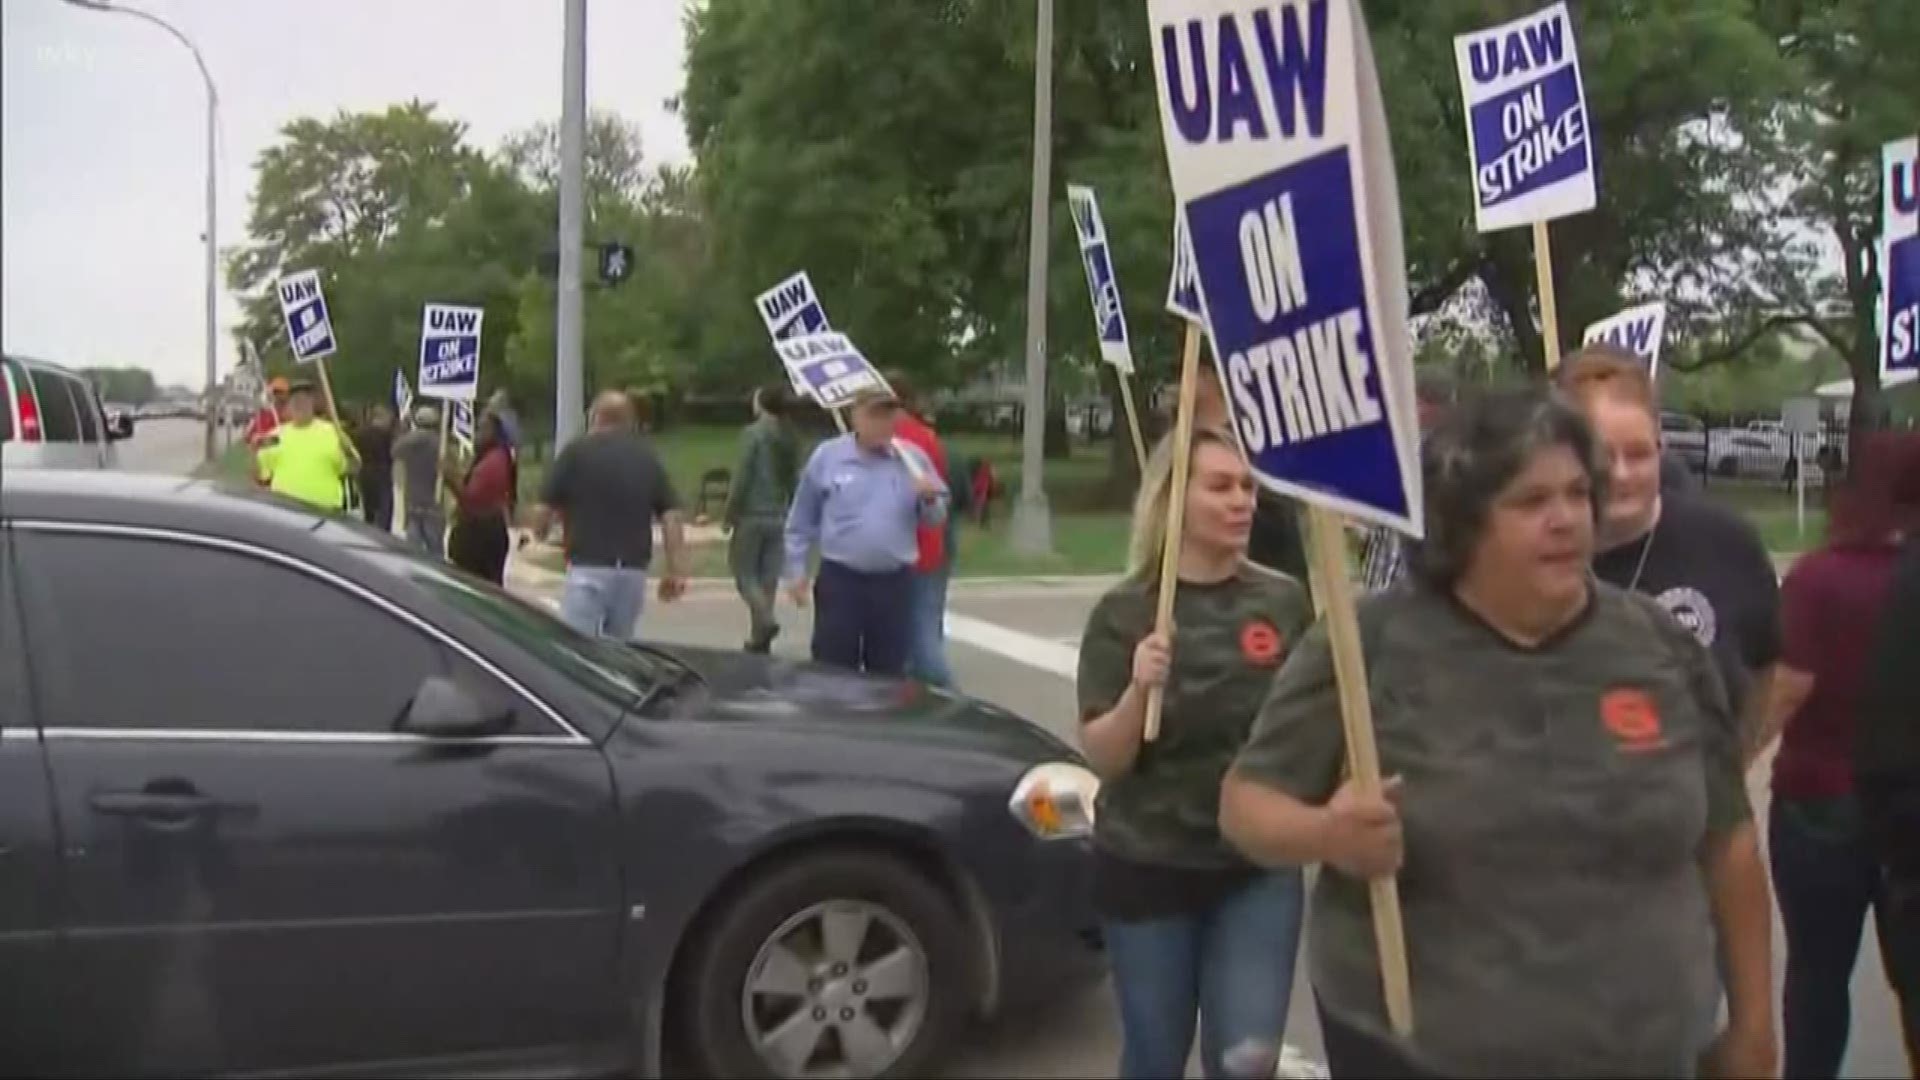 The United Auto Workers union ratified a new deal on Friday. Rachel Polansky reports.